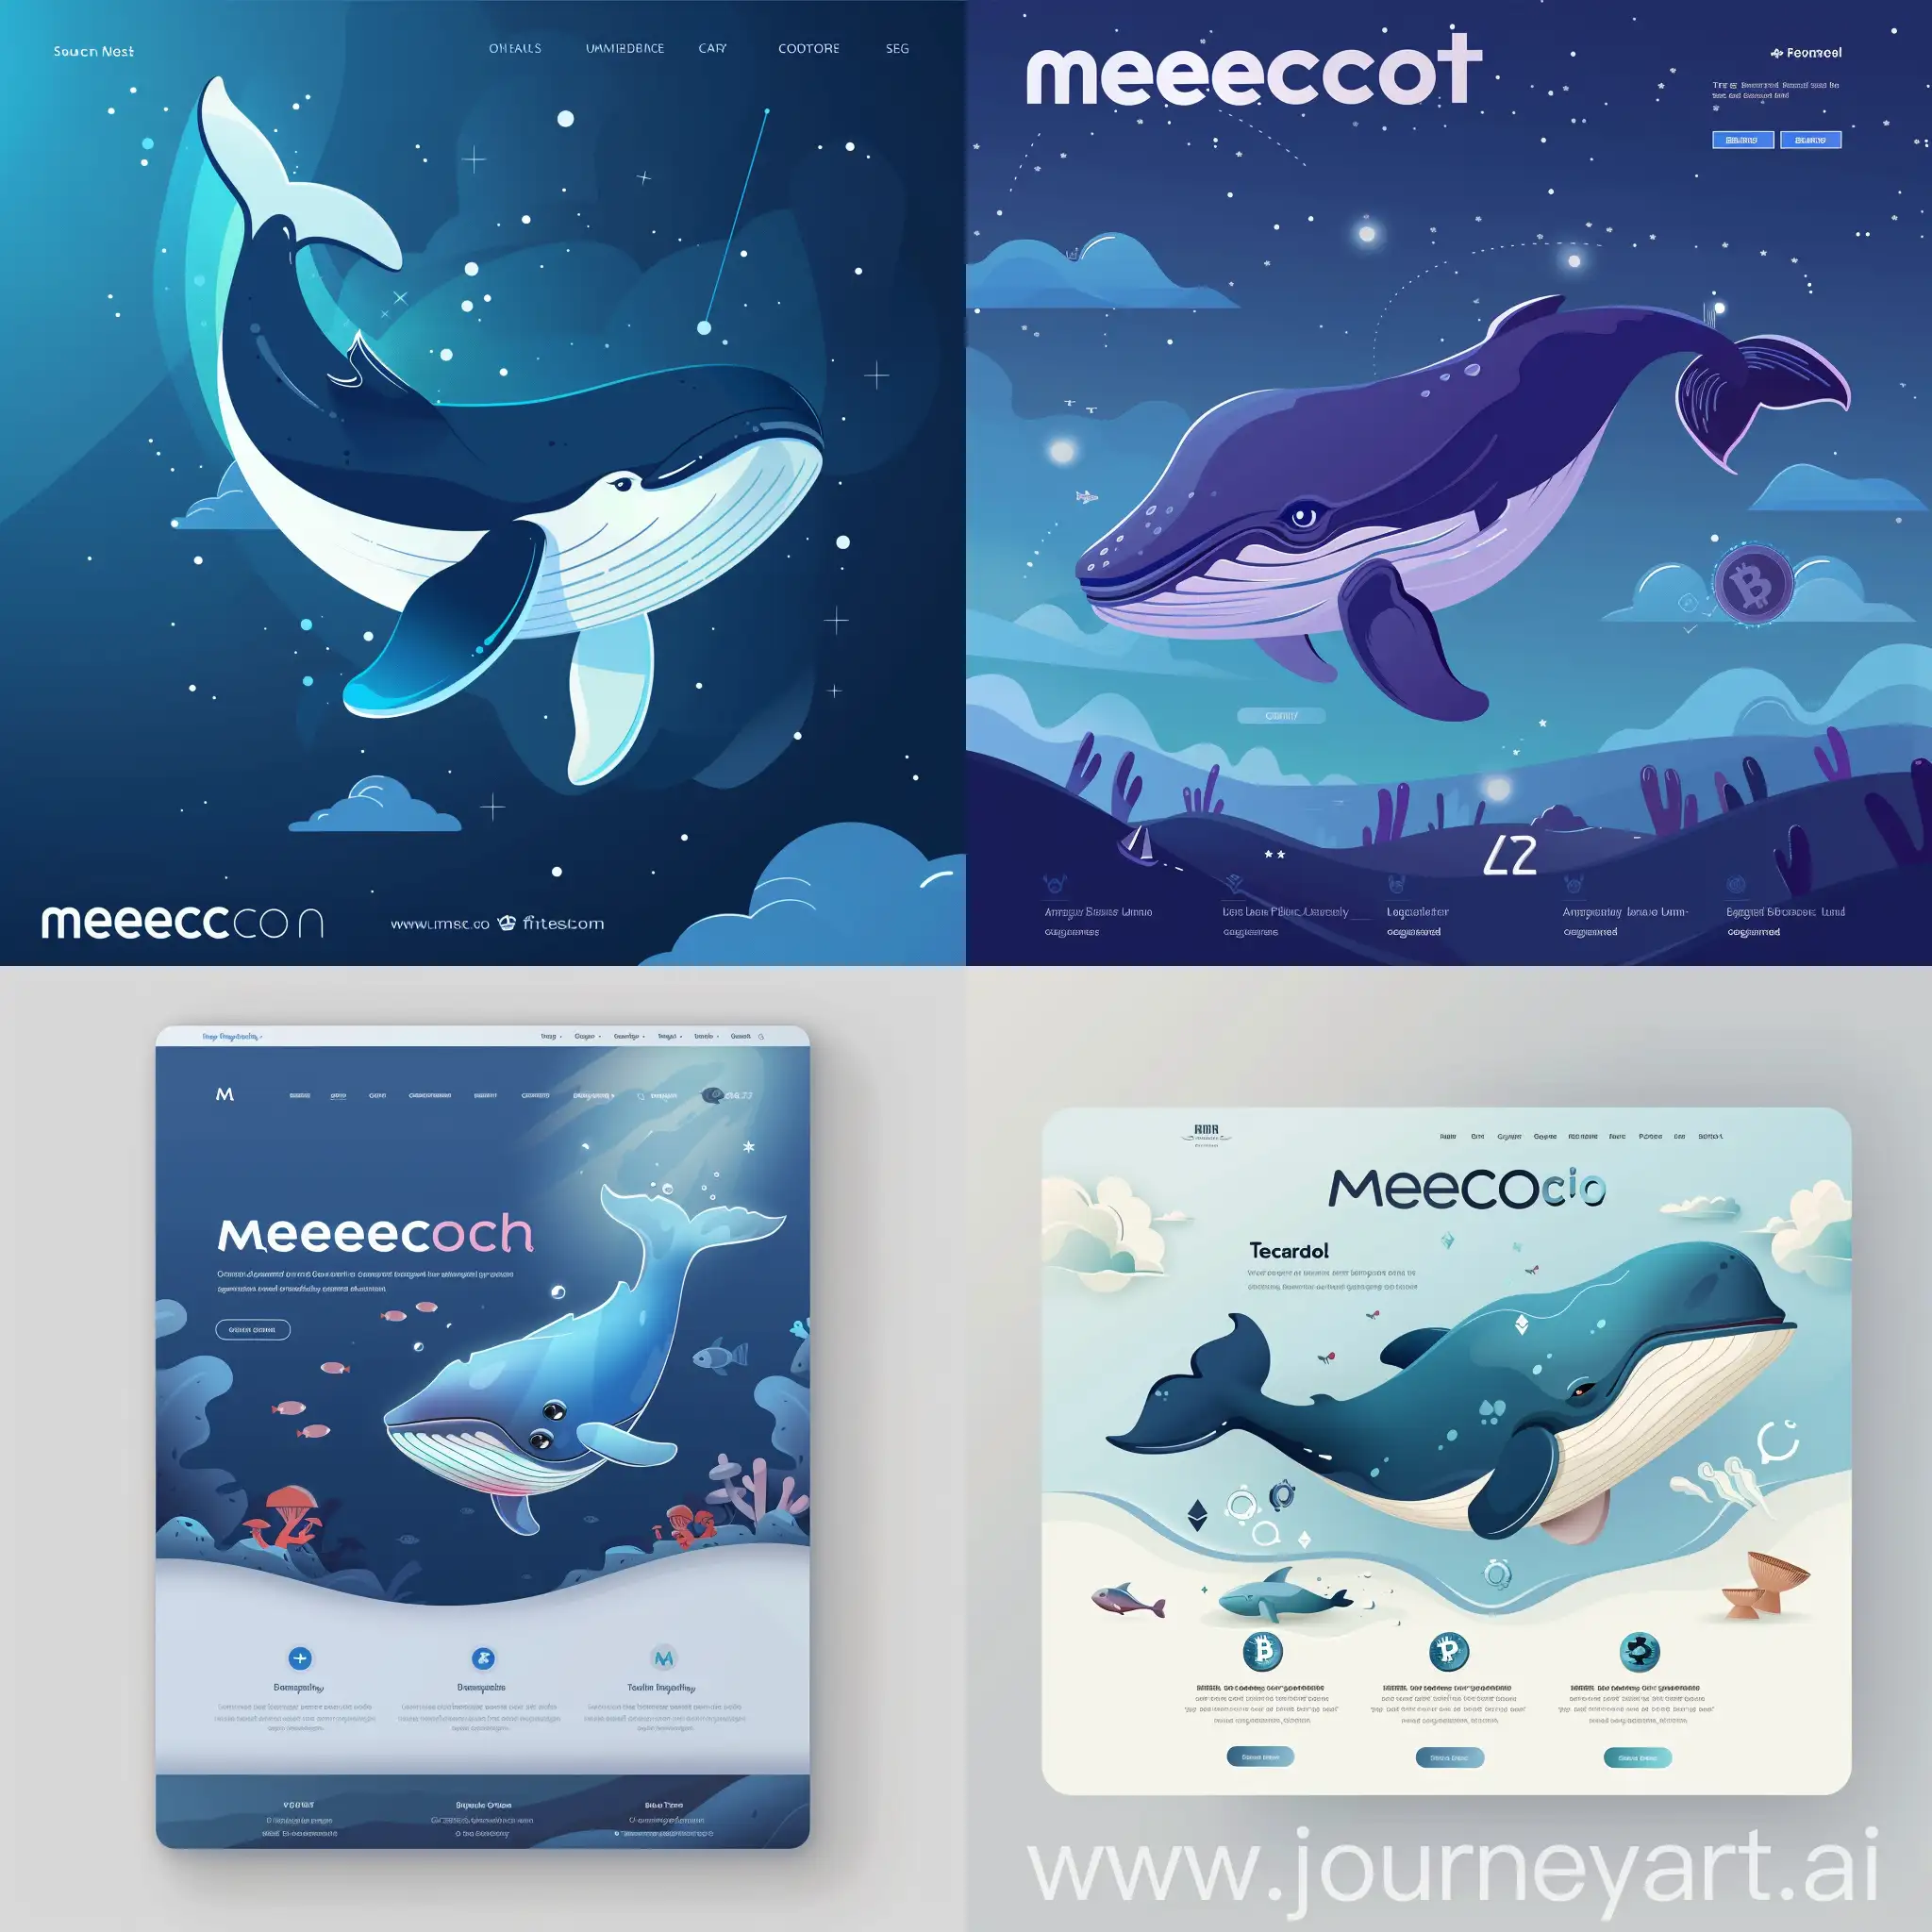 A landing page for memecoin crypto with logo a cute animated whale. It must represent trust and make users fall in love with it.